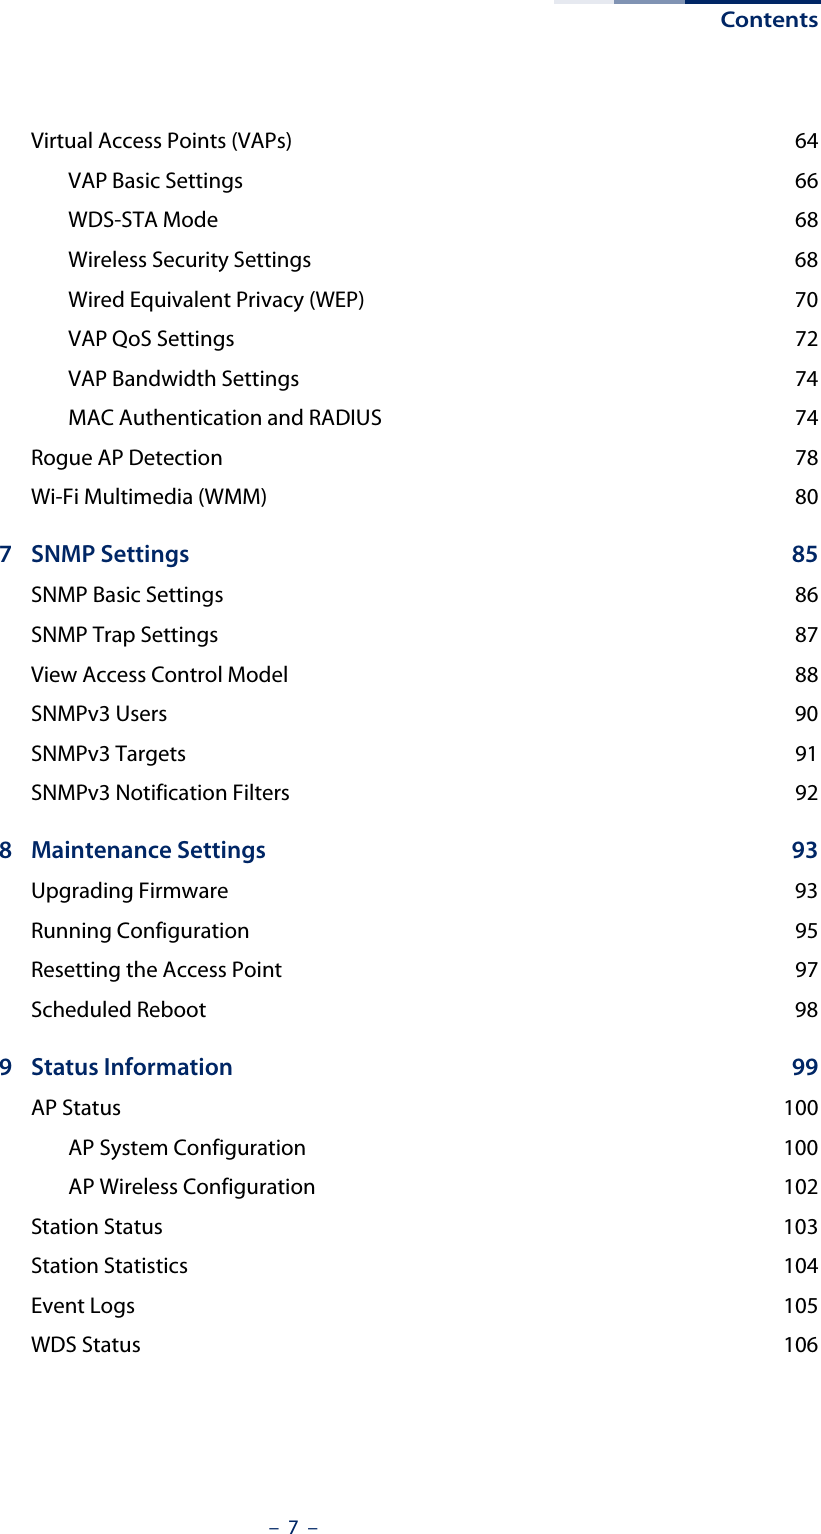 Contents–  7  –Virtual Access Points (VAPs)  64VAP Basic Settings  66WDS-STA Mode  68Wireless Security Settings  68Wired Equivalent Privacy (WEP)  70VAP QoS Settings  72VAP Bandwidth Settings  74MAC Authentication and RADIUS  74Rogue AP Detection  78Wi-Fi Multimedia (WMM)  807 SNMP Settings  85SNMP Basic Settings  86SNMP Trap Settings  87View Access Control Model  88SNMPv3 Users  90SNMPv3 Targets  91SNMPv3 Notification Filters  928 Maintenance Settings  93Upgrading Firmware  93Running Configuration  95Resetting the Access Point  97Scheduled Reboot  989 Status Information  99AP Status  100AP System Configuration  100AP Wireless Configuration  102Station Status  103Station Statistics  104Event Logs  105WDS Status  106